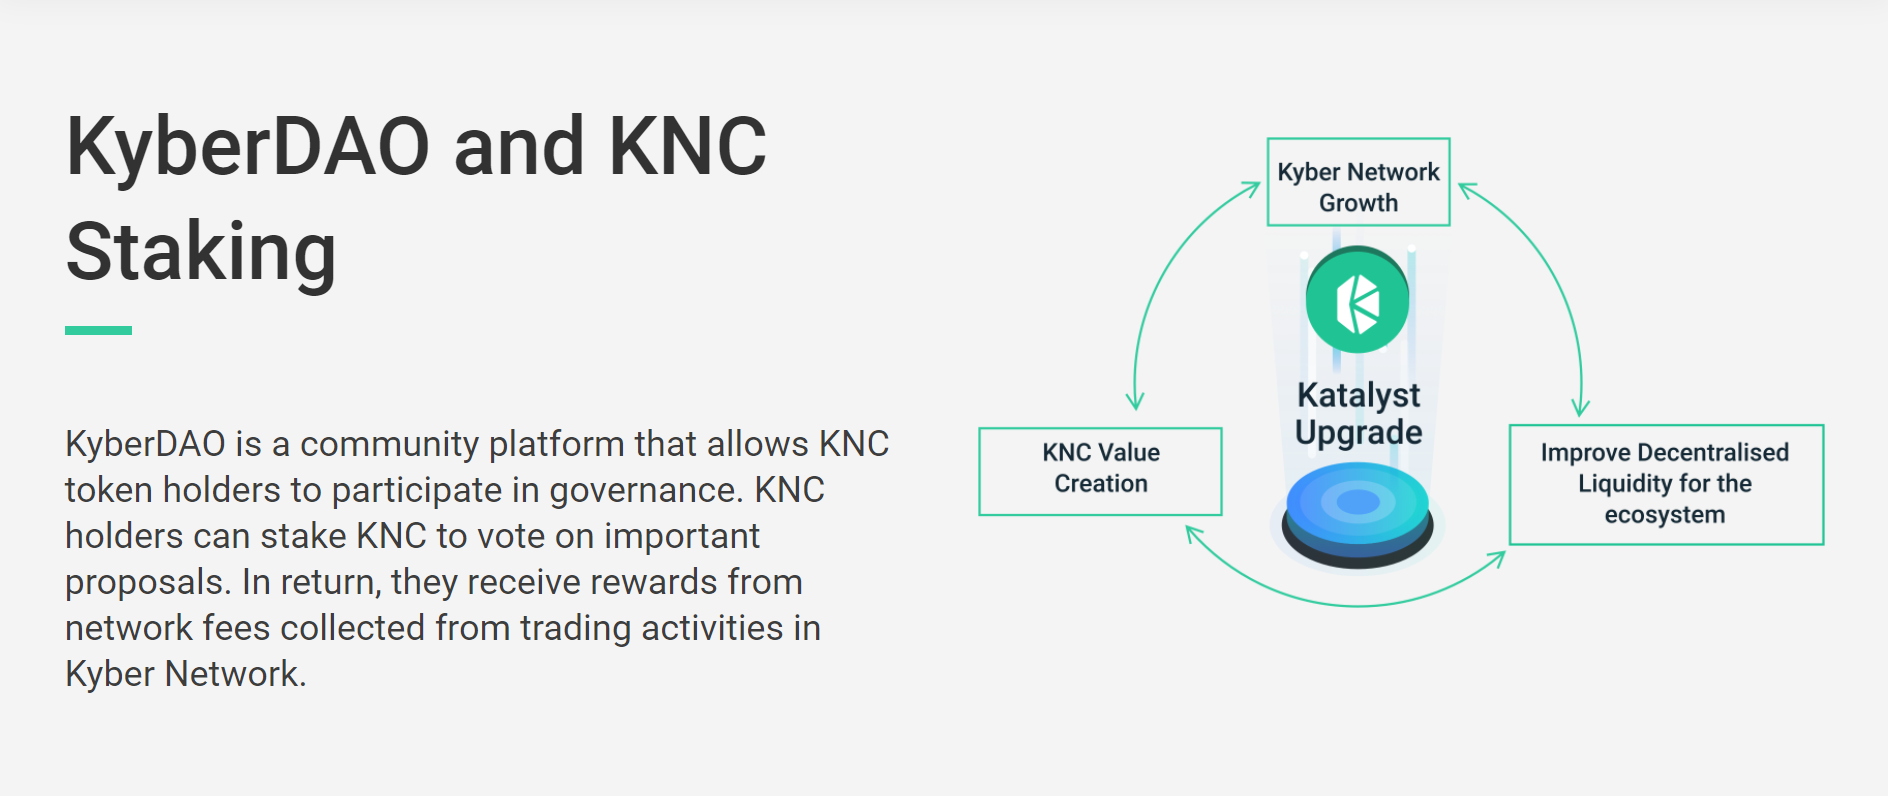 KyberDAO, Kyber governance, and KNC staking.